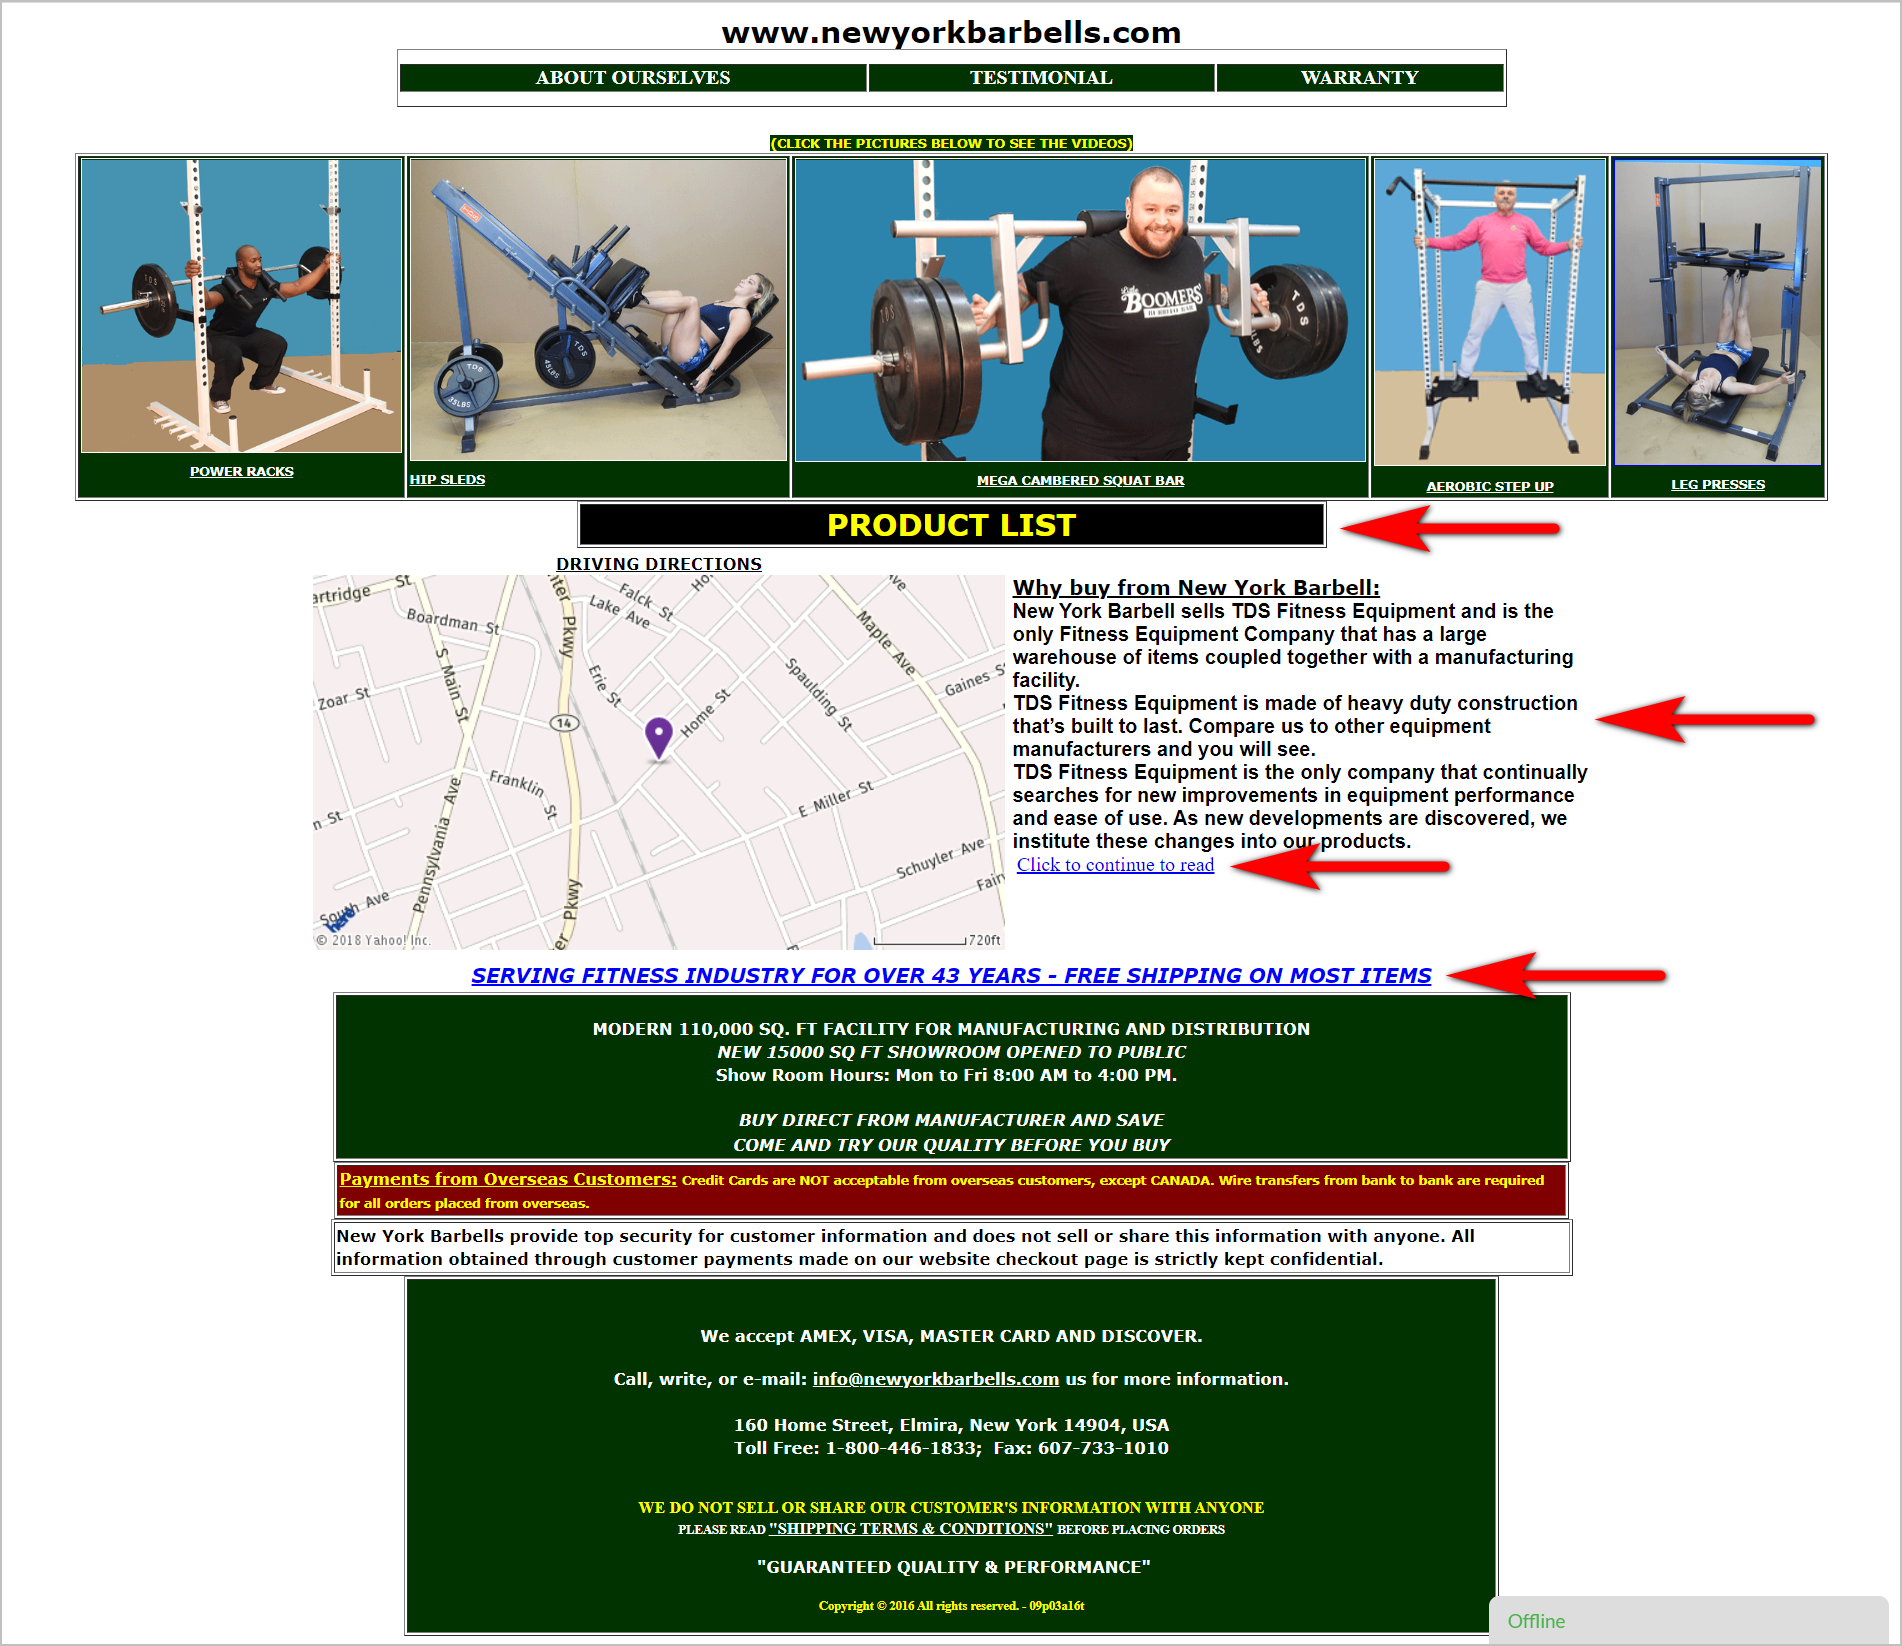 minimize cognitive load: overwhelming visual load example - newyorkbarbells.com homepage lacks a clear system to convey interactive versus non-interactive elements. "product list", for instance, is a section heading but is inside a black rectangular box with a prominent border, making it look like a button. the page also seems to use colors randomly - there's white text against a green background, bright yellow text against a black background, bright yellow text against a maroon background, and a combination of white and bright yellow text against a green background. the page is also text-heavy with blocks of text all over